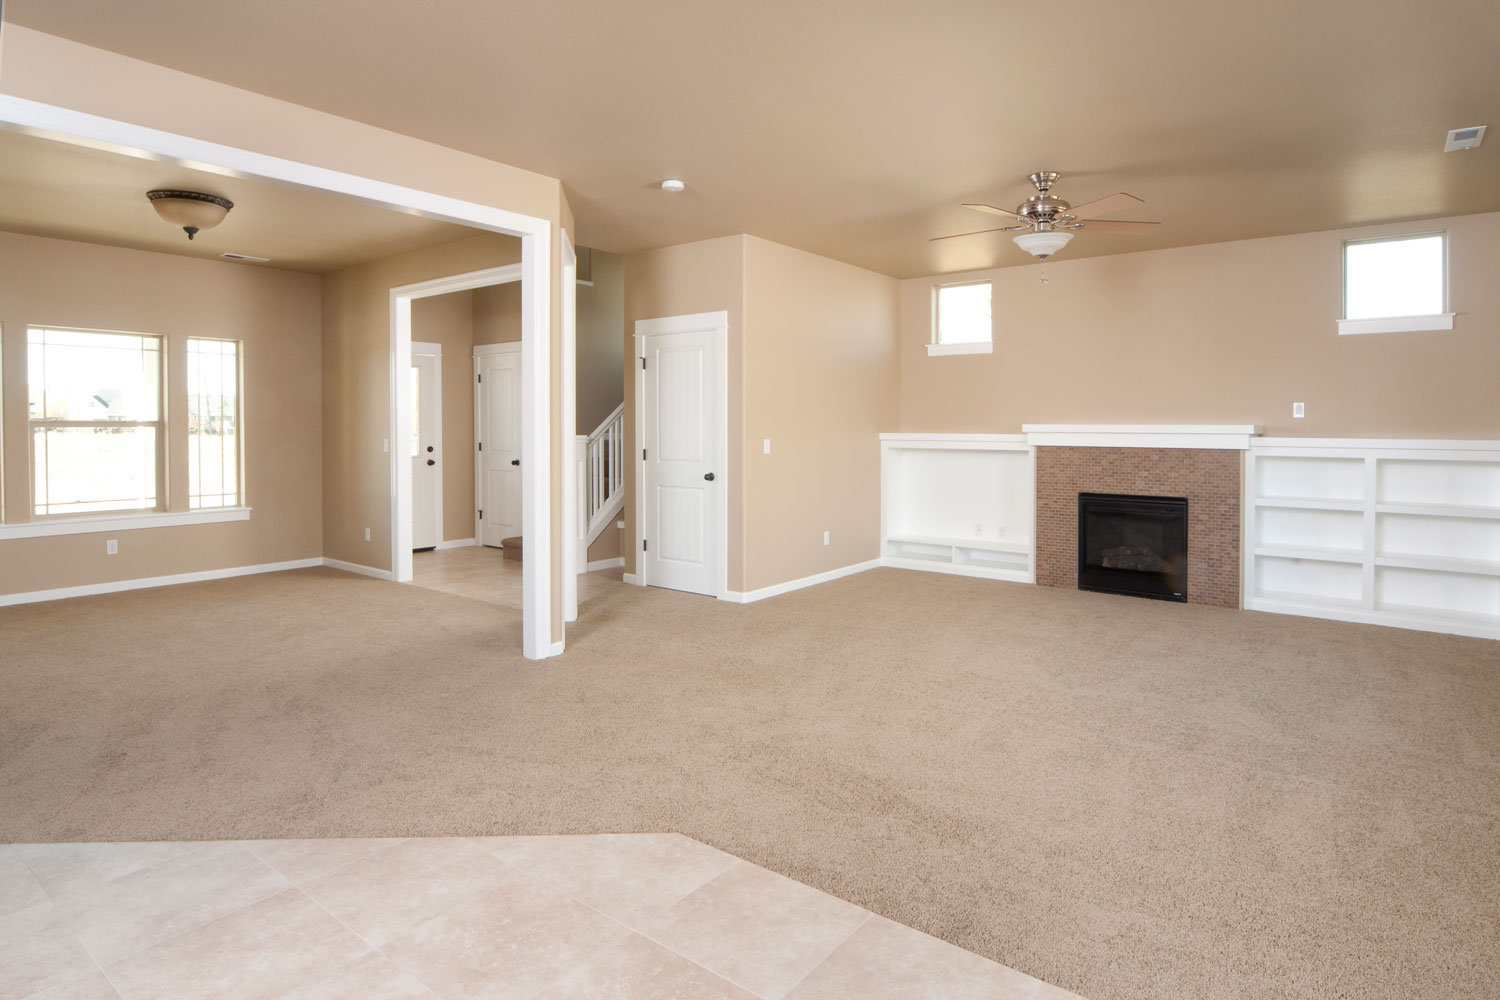 A living room painted in tan, white trims and carpeted flooring